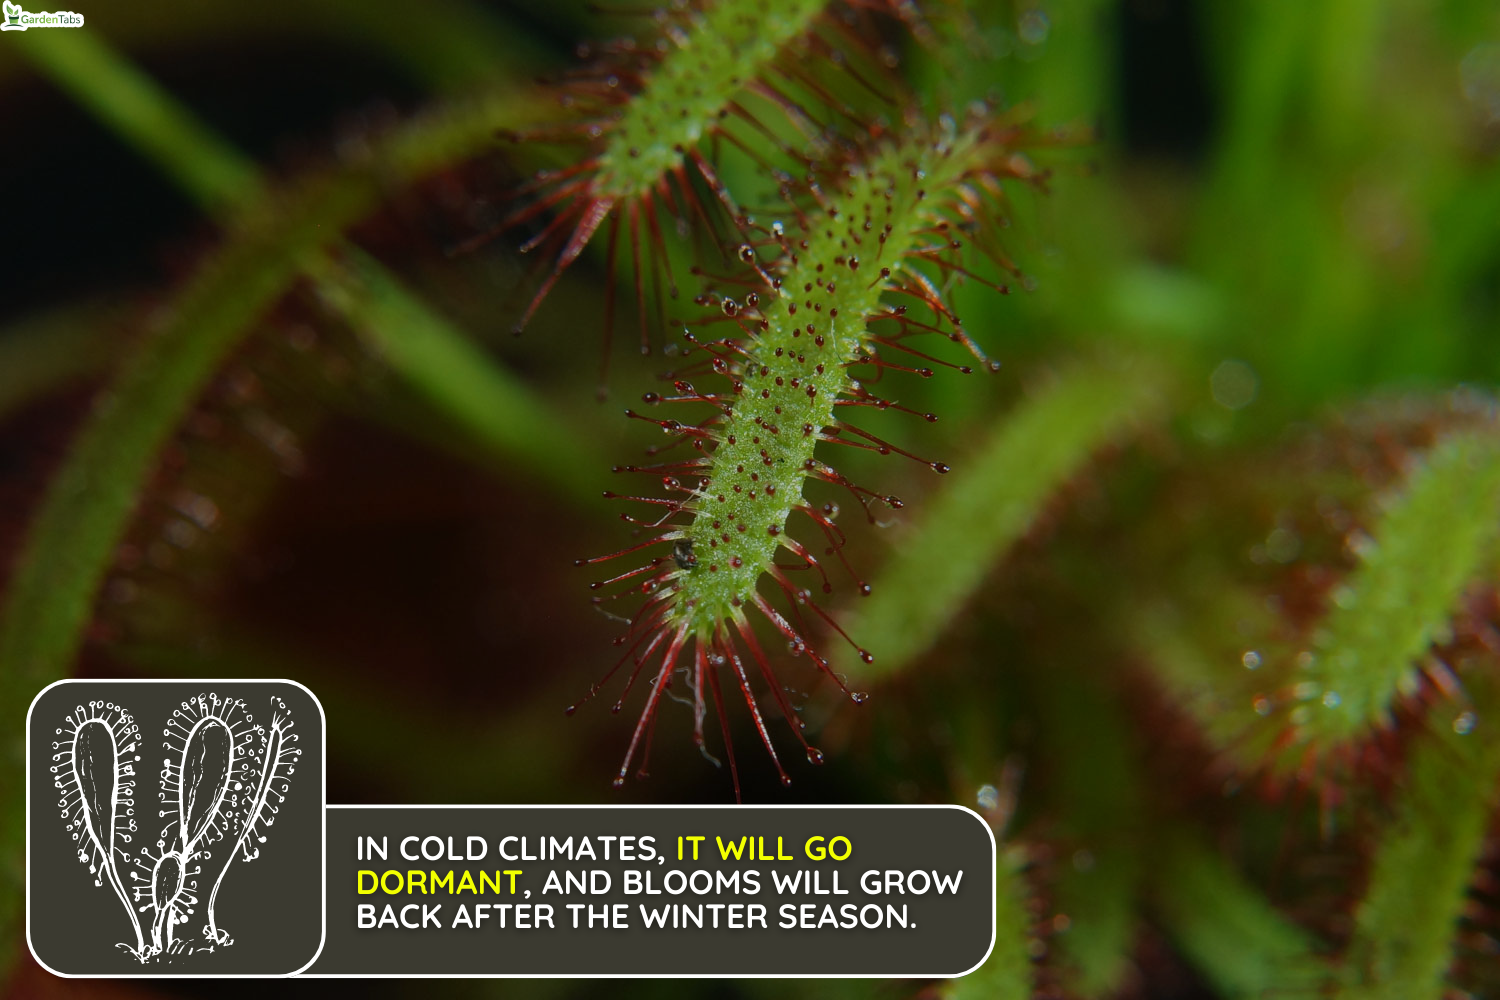 Rosicotta, Drosera Capensis - an insect-eating plant, on a black background, Does Drosera Capensis Need Dormancy